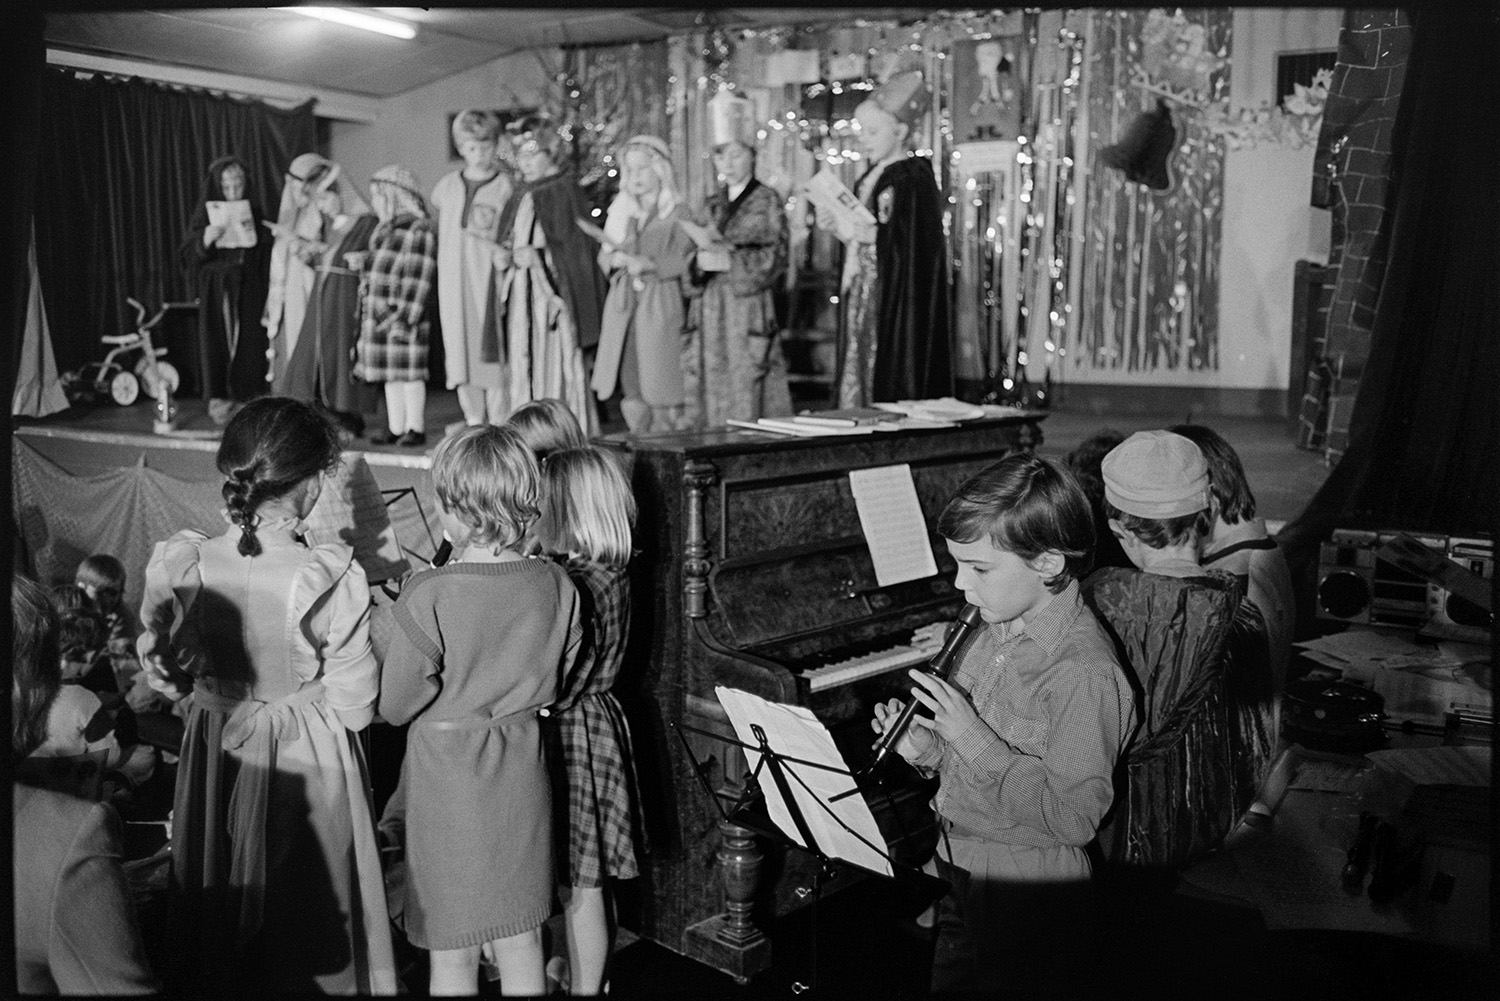 Christmas show in village hall Nativity play, children performing.
[Children singing in a Christmas show on the stage in Dolton Village Hall, dressed as characters in the Nativity story. Other children accompanying them on recorders and a piano in the foreground.]